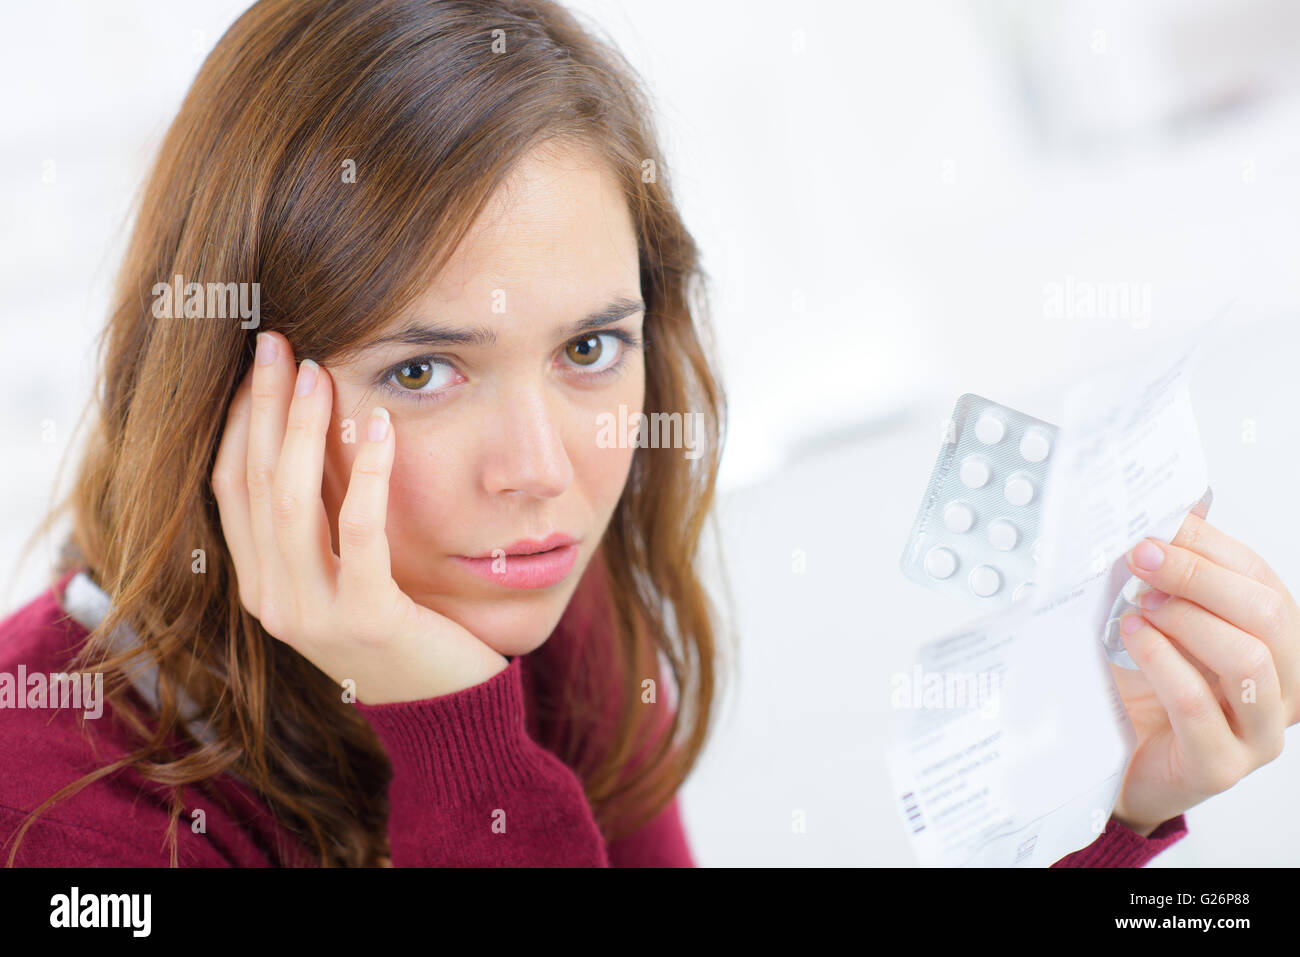 Worried woman holding tablets Stock Photo